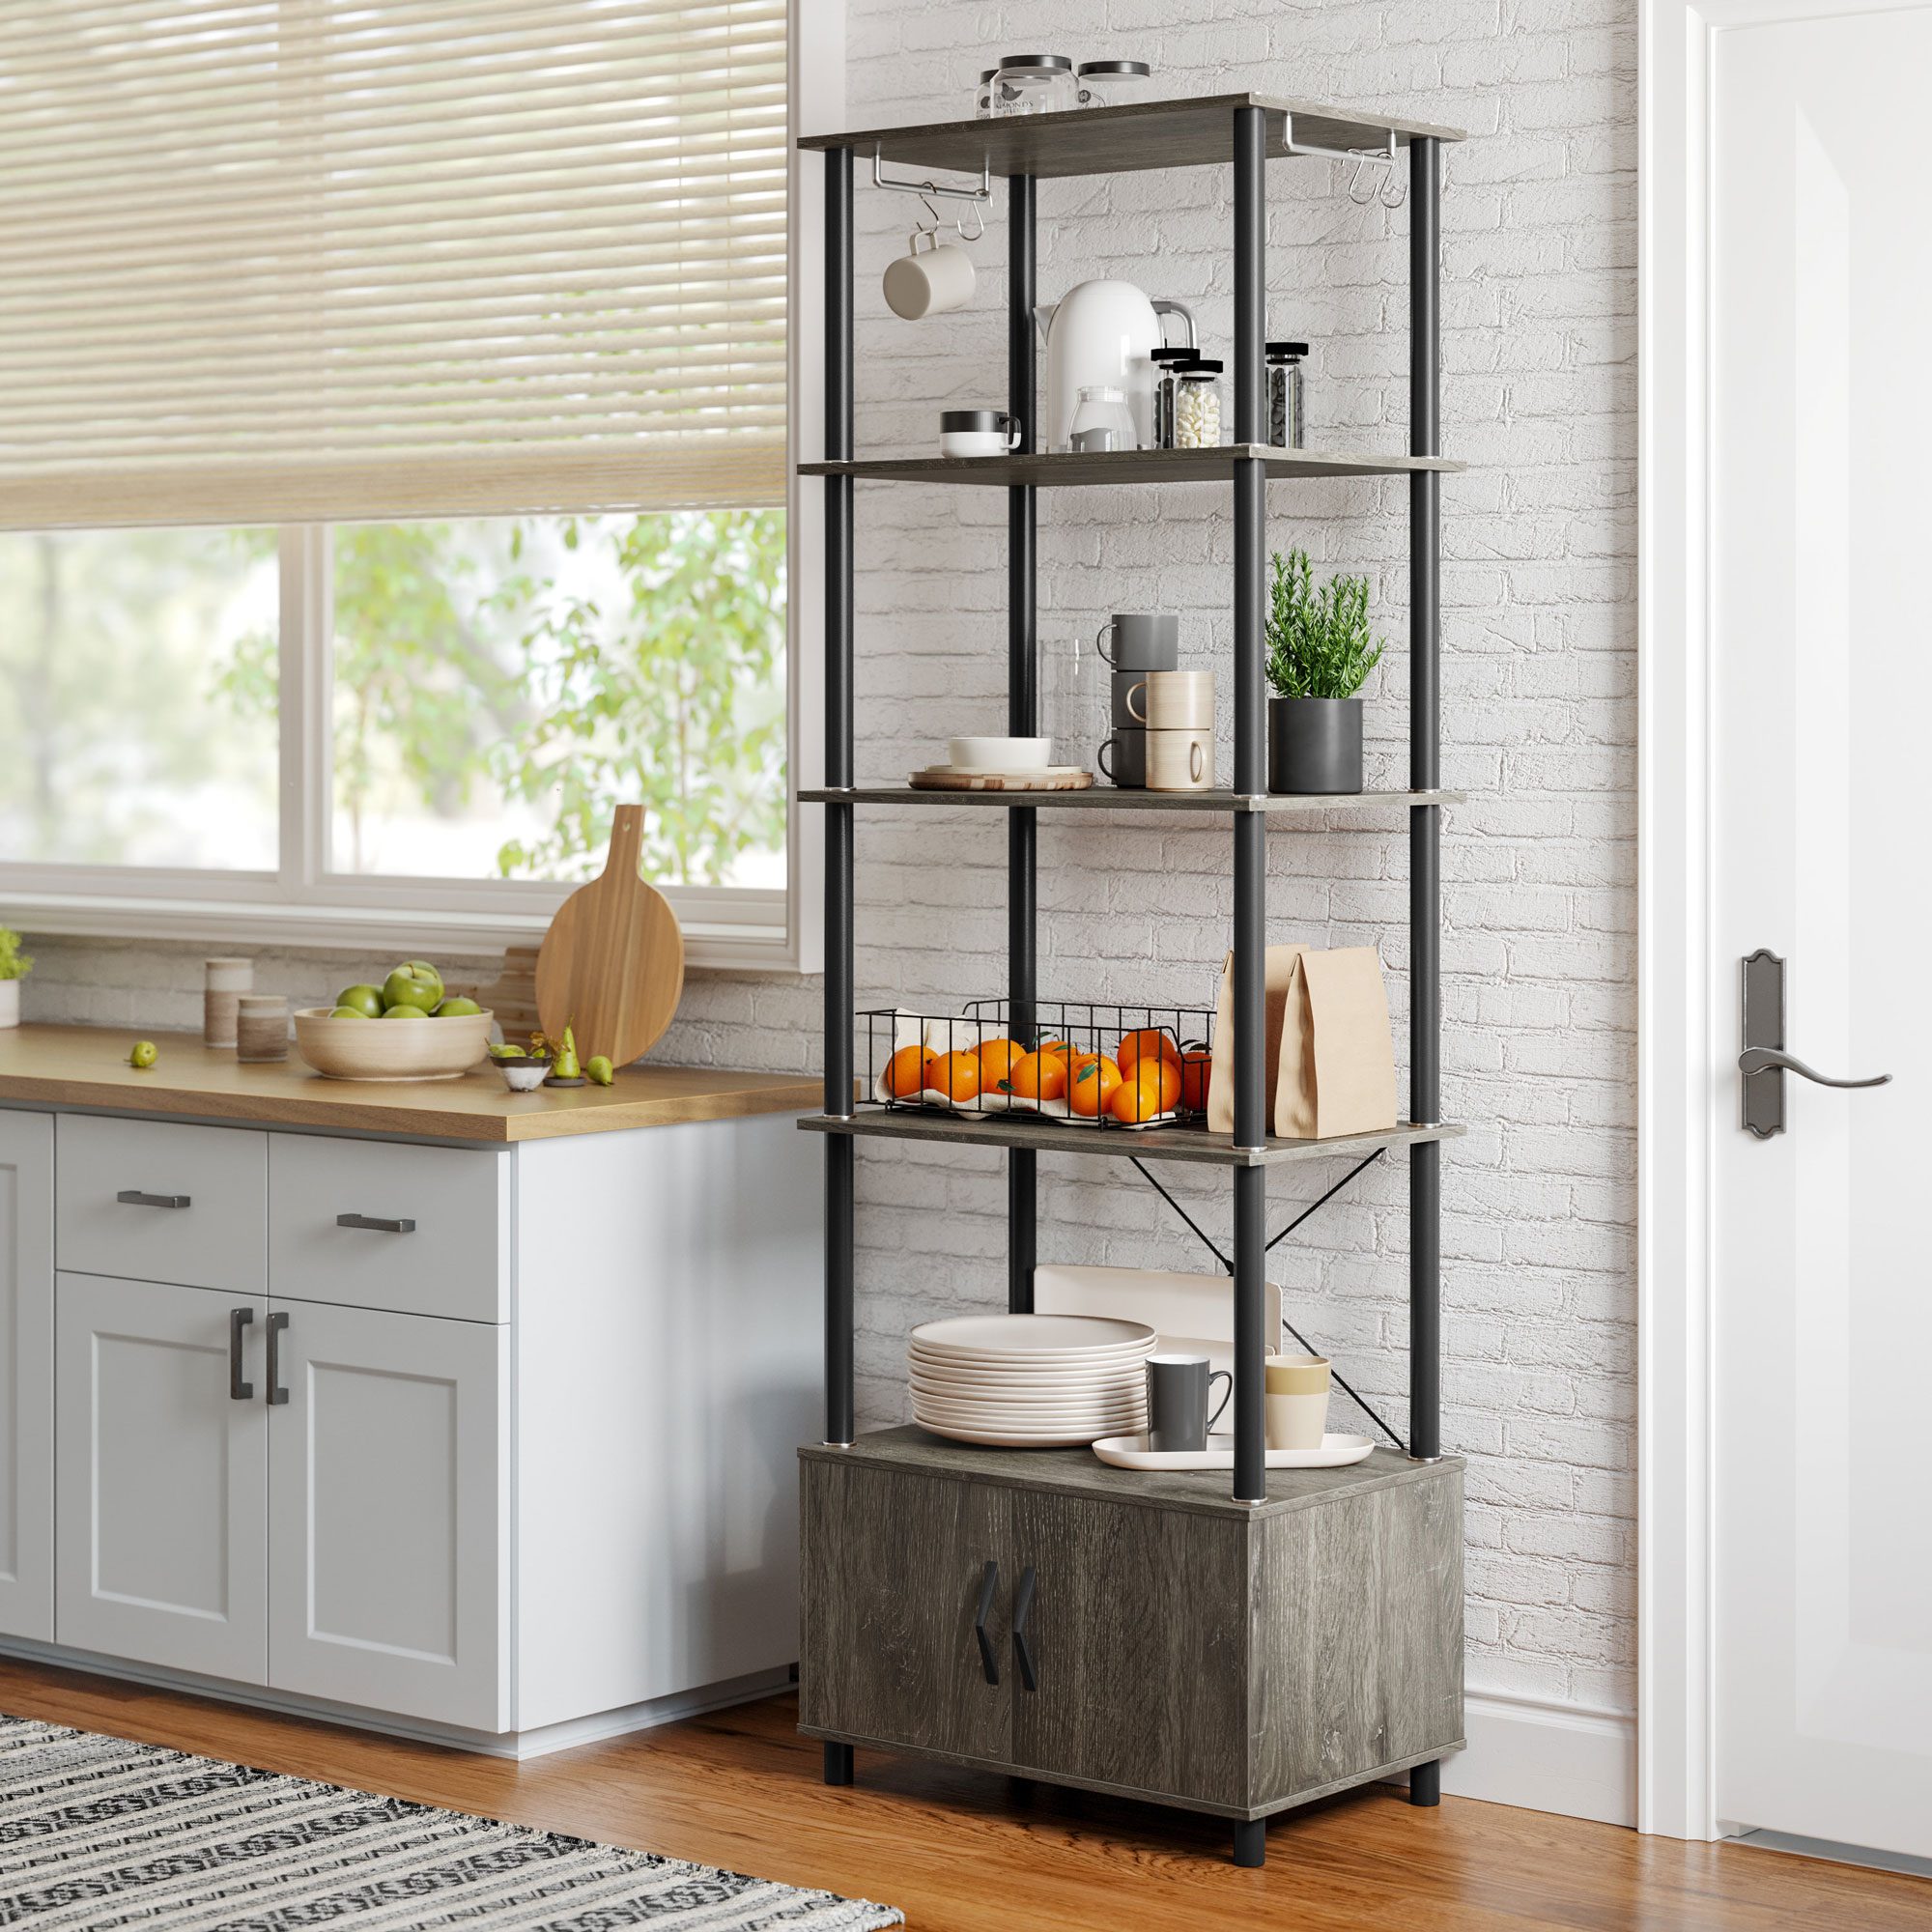 Trent Austin Design Moshier 23.75in Standard Bakers Rack With Microwave Compatibility Ecomm Via Wayfair.com FT ?w=2000